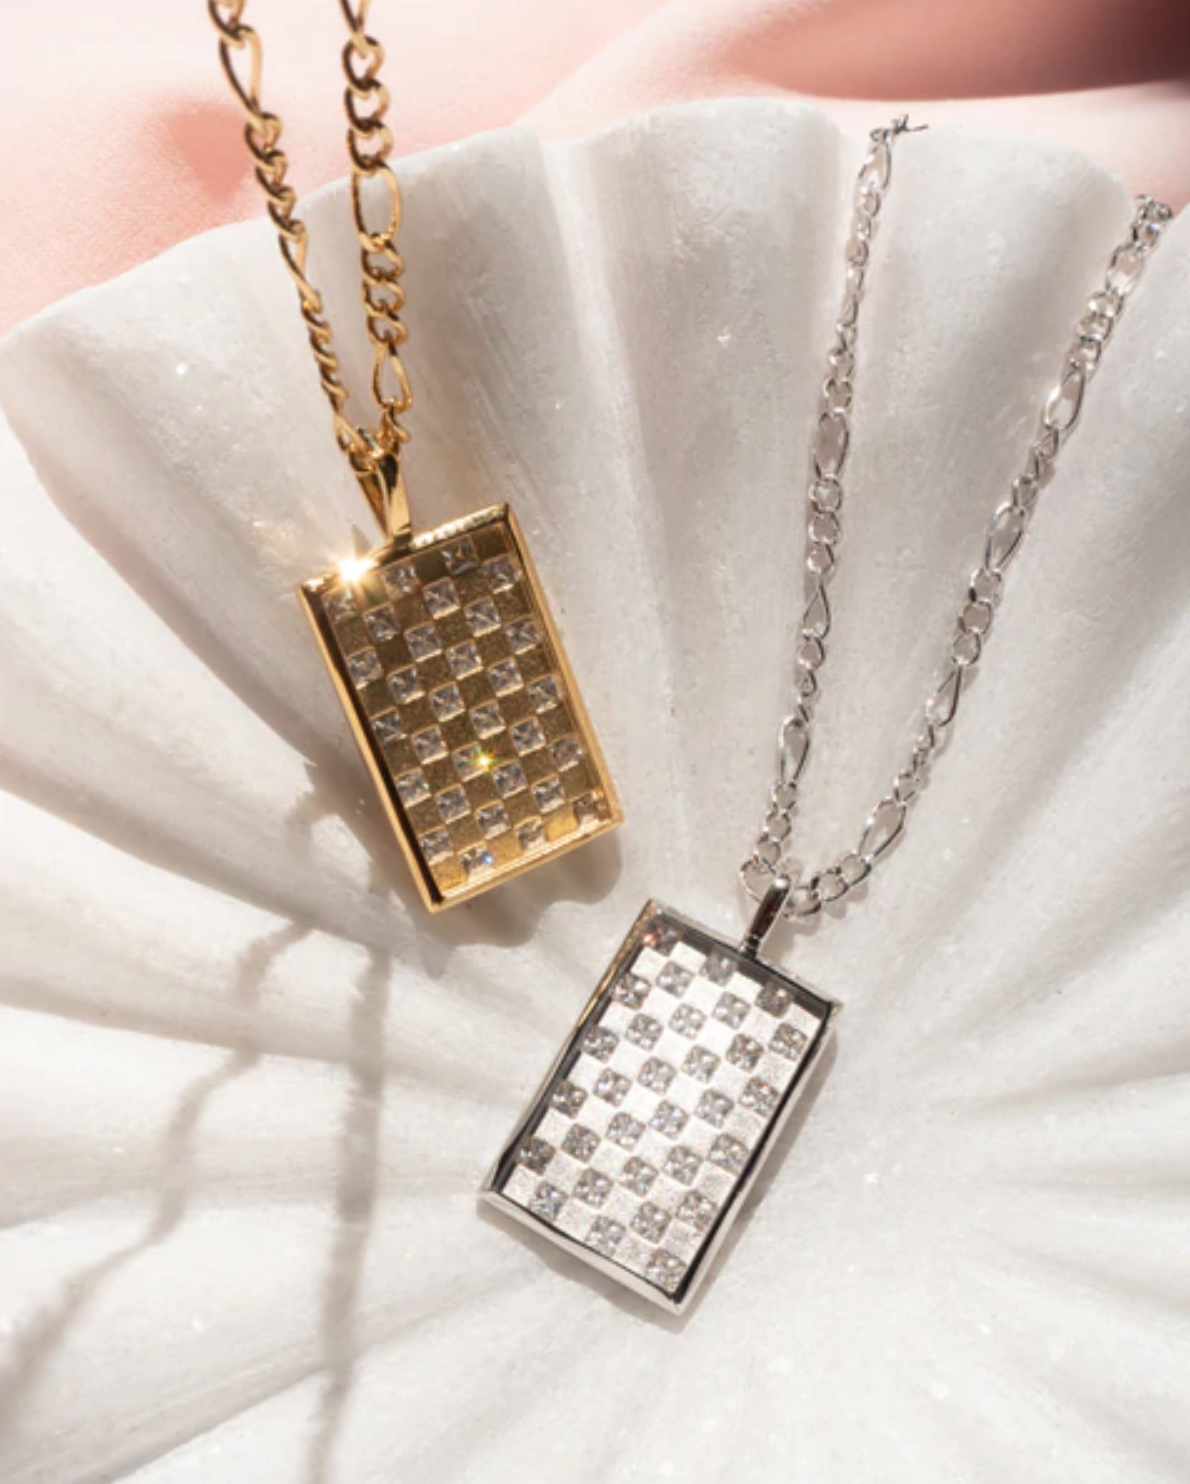 LUV AJ Checkerboard Dog Tag Necklace in Gold Laying Flat

